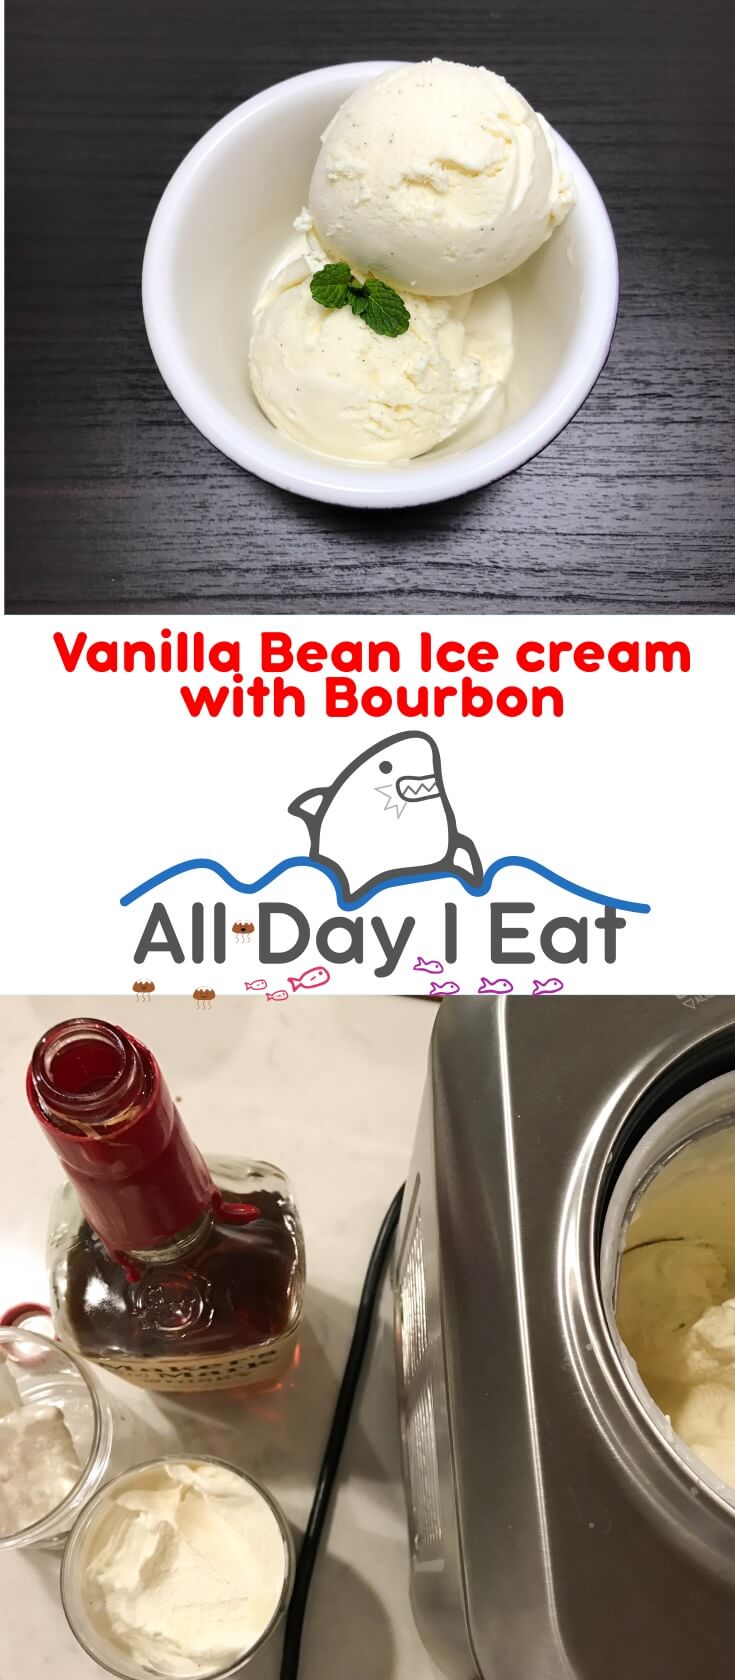 Vanilla Bean Ice cream with Bourbon. A sophisticated ice cream for adults, a rich and deep vanilla flavor is complemented with a splash of bourbon. | www.alldayieat.com